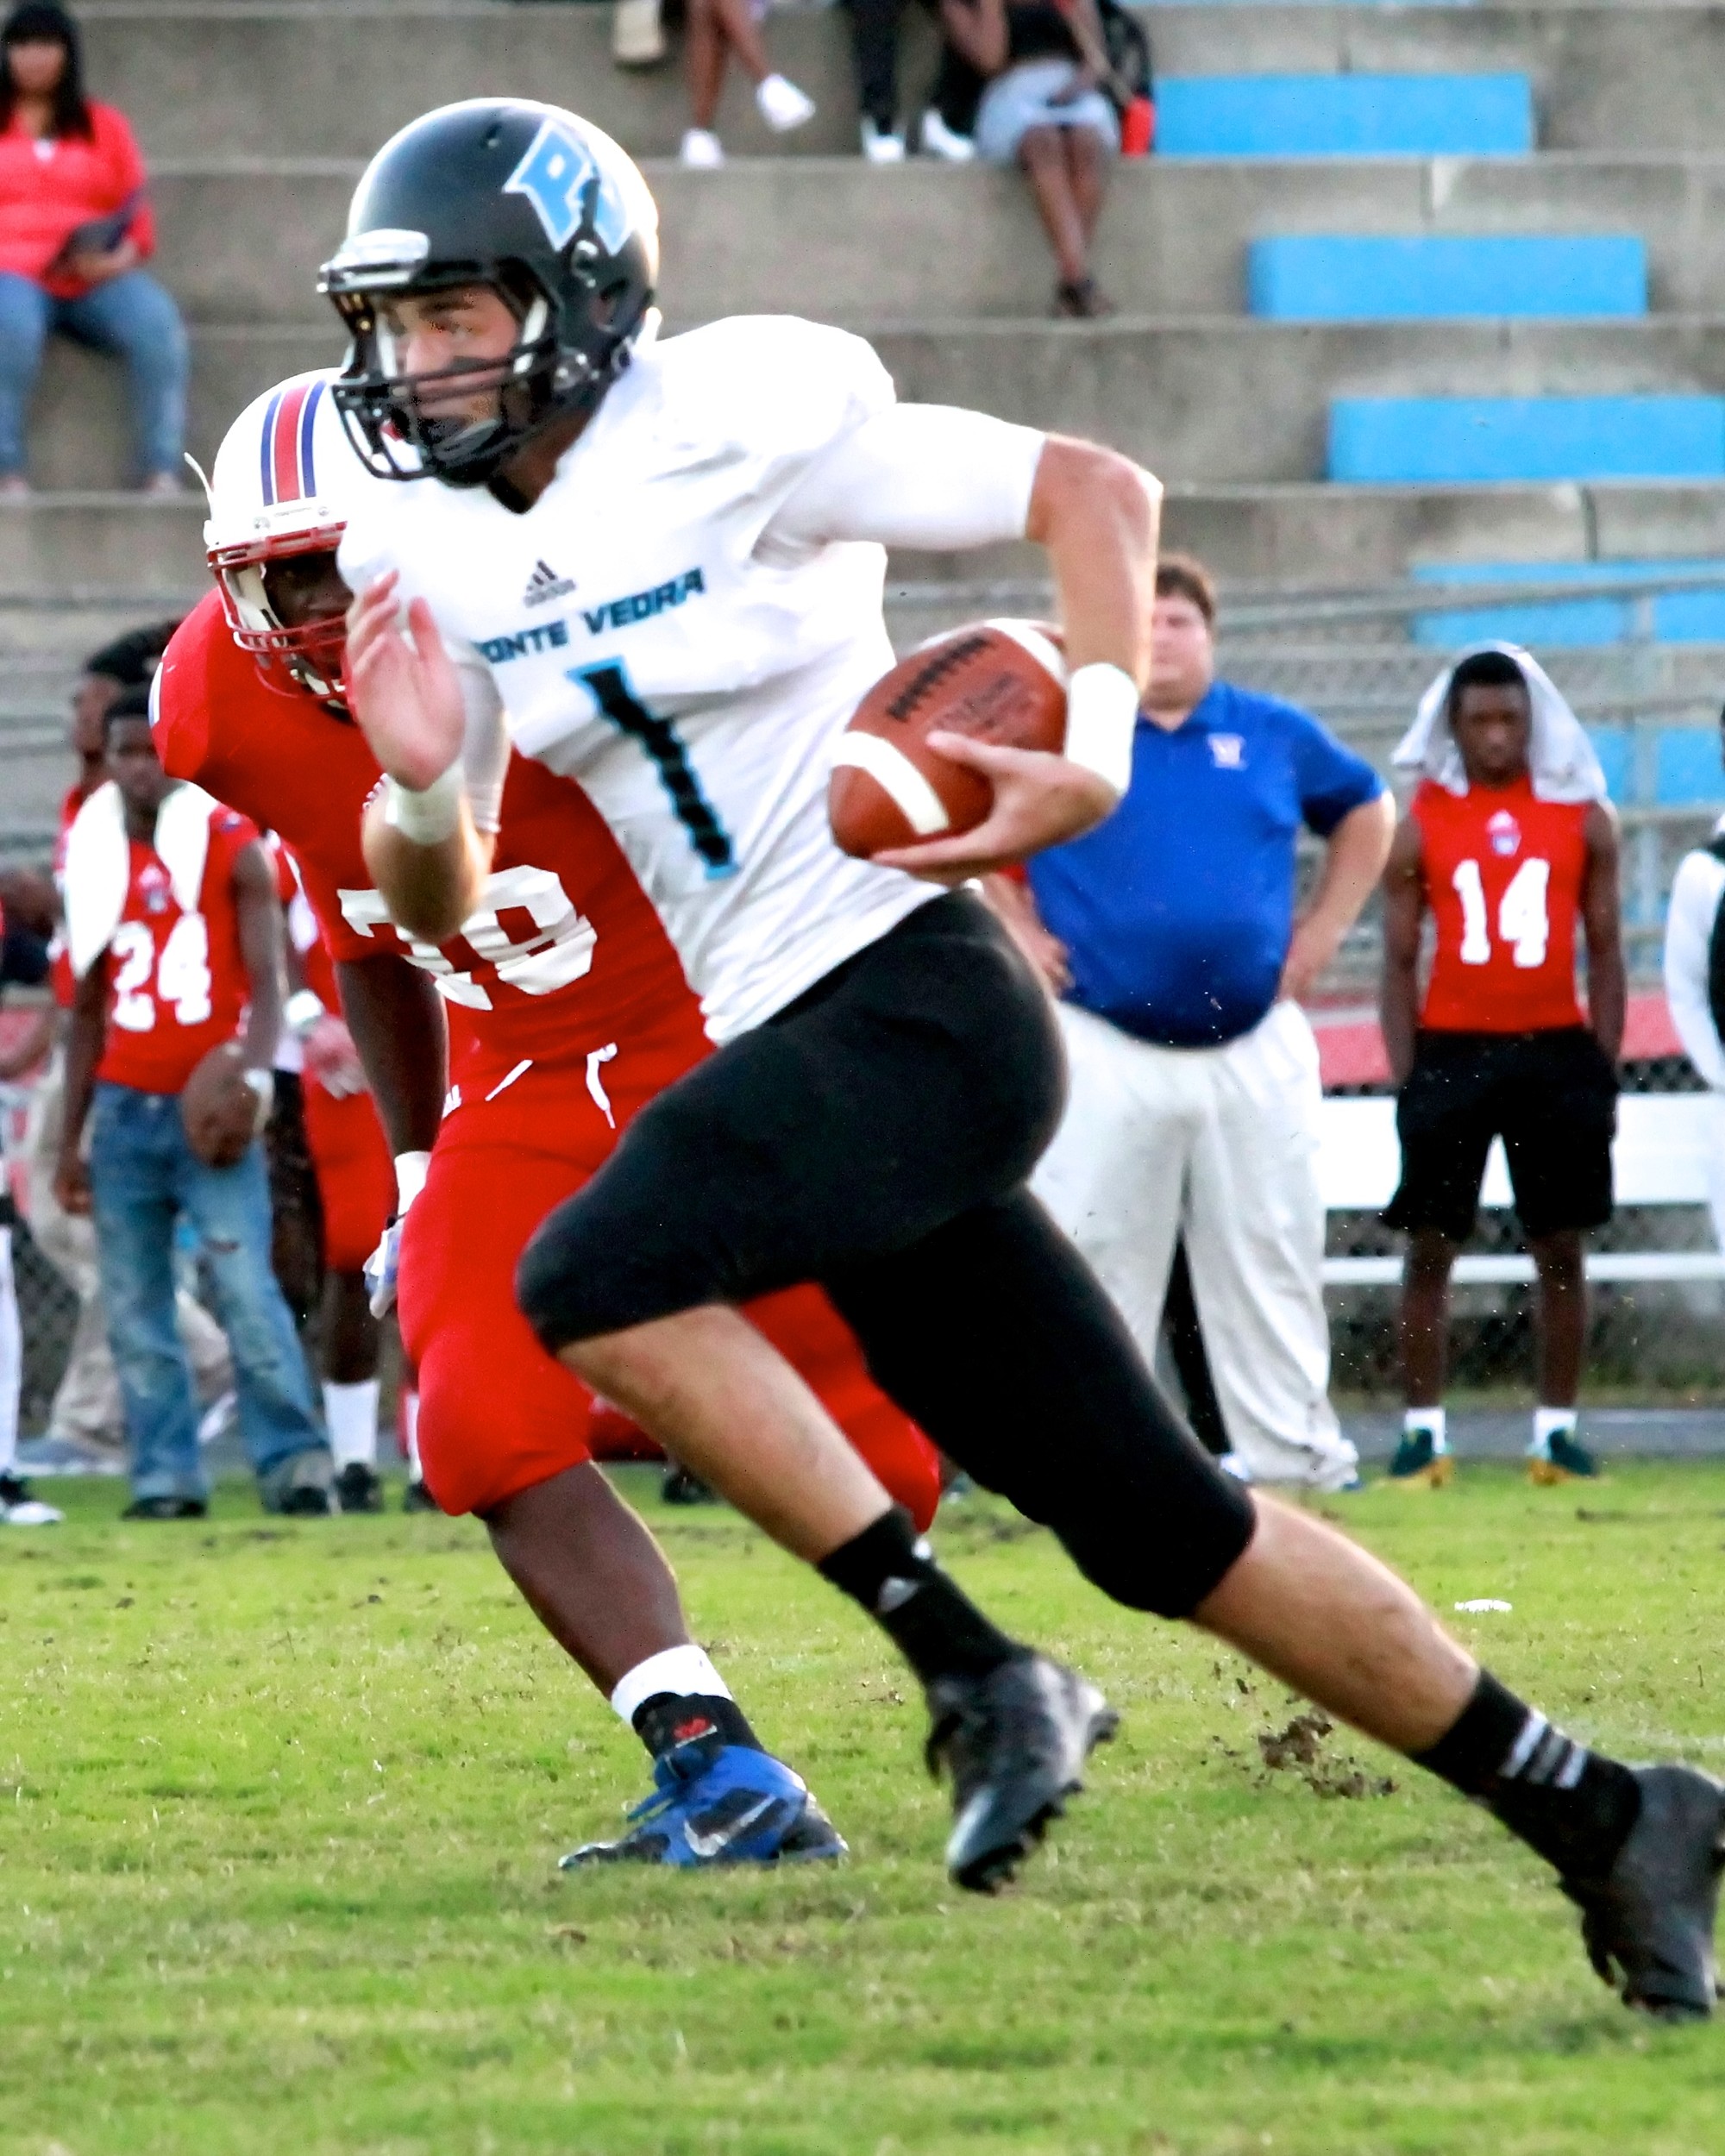 #1 JD Pirris heads for the end zone and the Sharks' first touchdown in 70-0 route of Wolfs